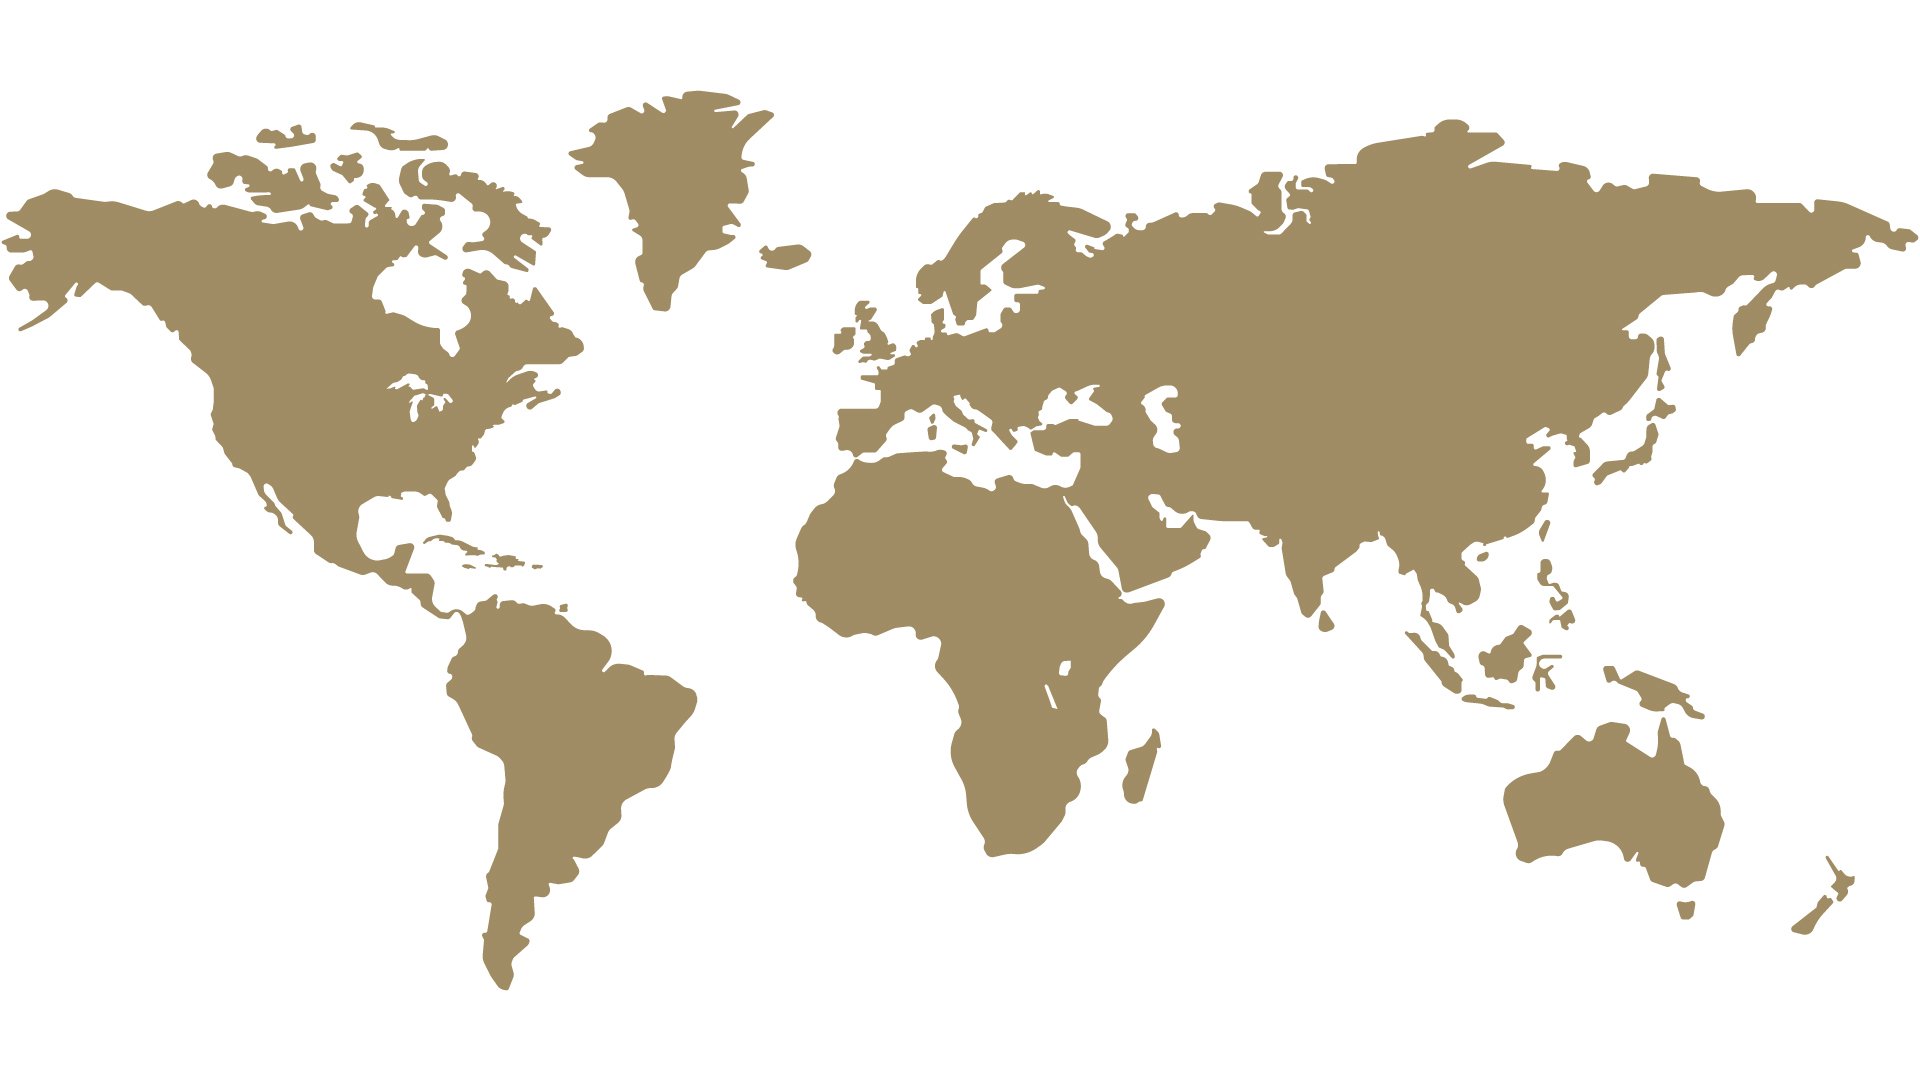 World maps without borders between countries